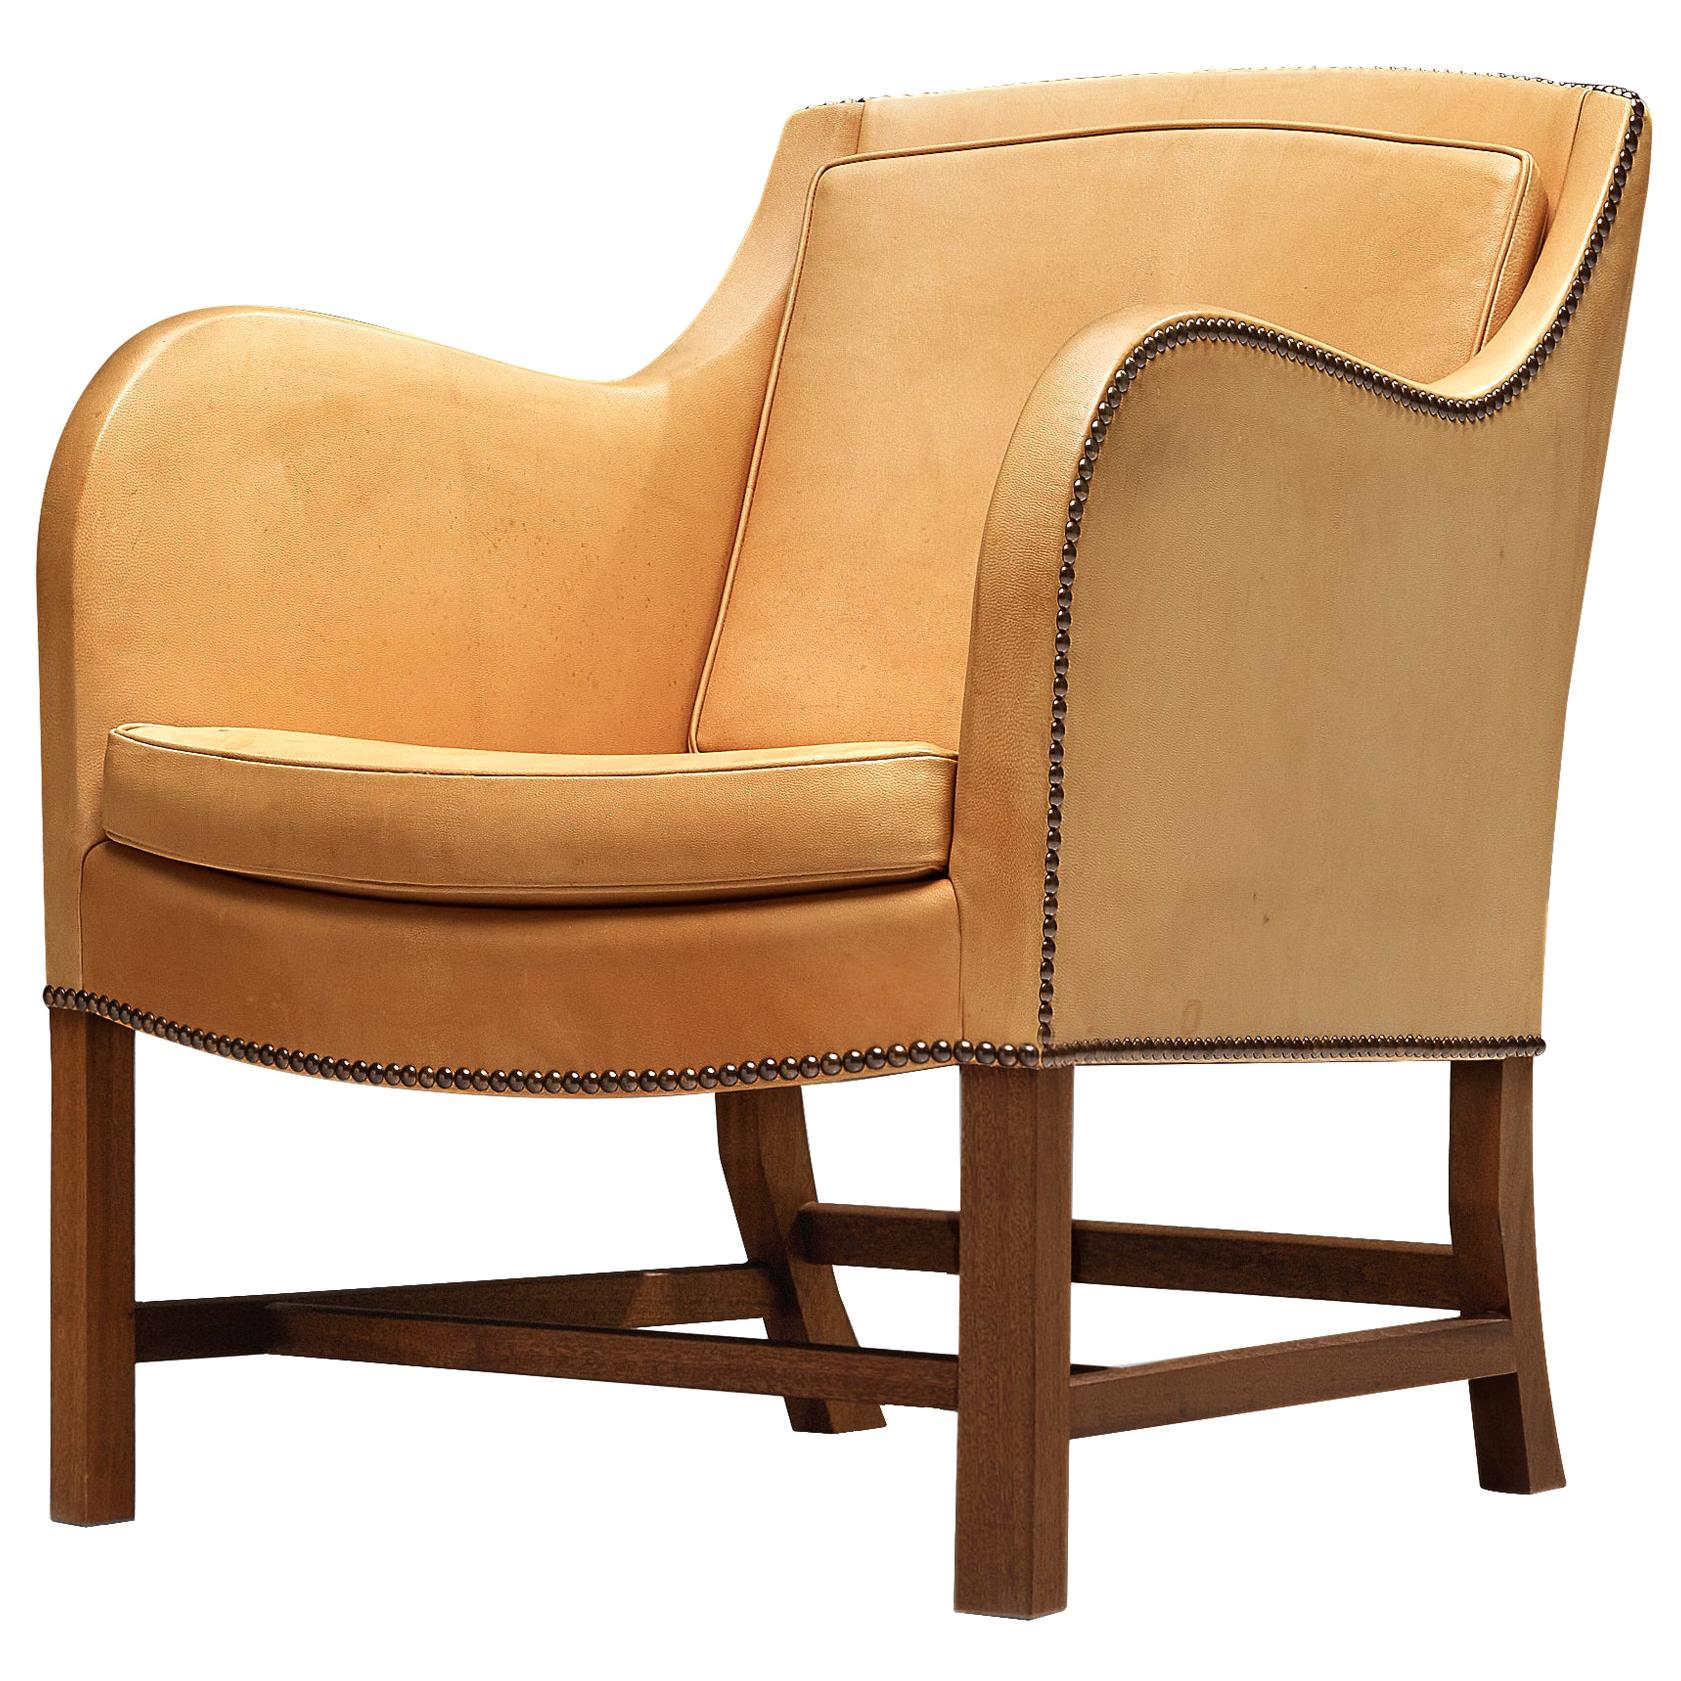 Kaare Klint and Edvard Kindt-Larsen Lounge Chair in Niger Leather and Mahogany